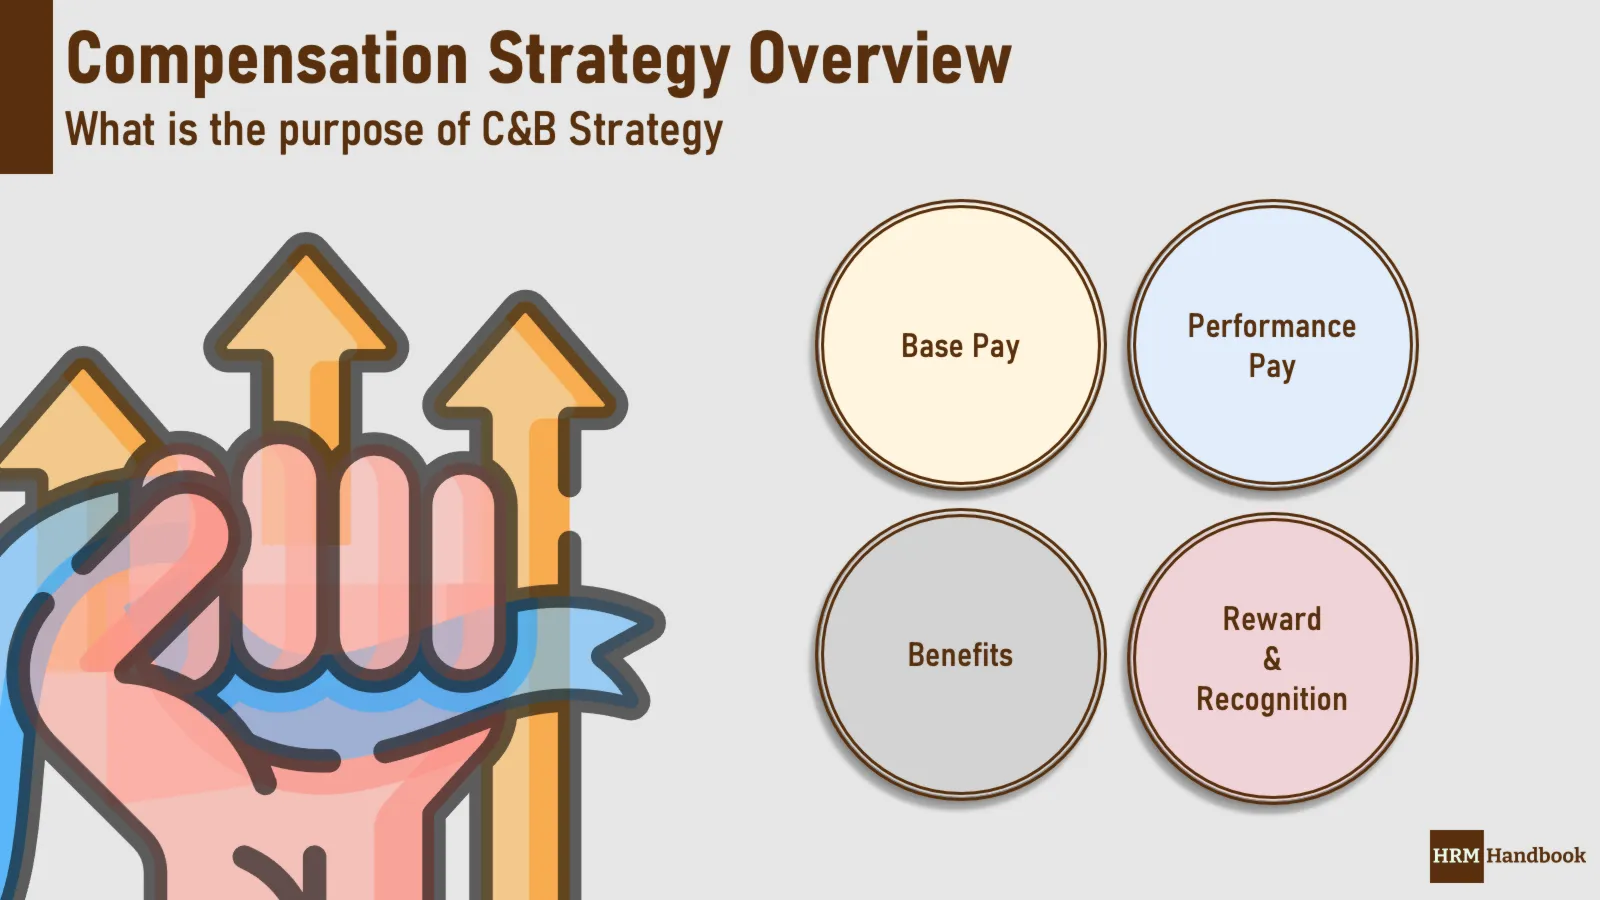 Compensation Strategy Overview: What areas and aspects of Compensation & Benefits Function and Processes are covered